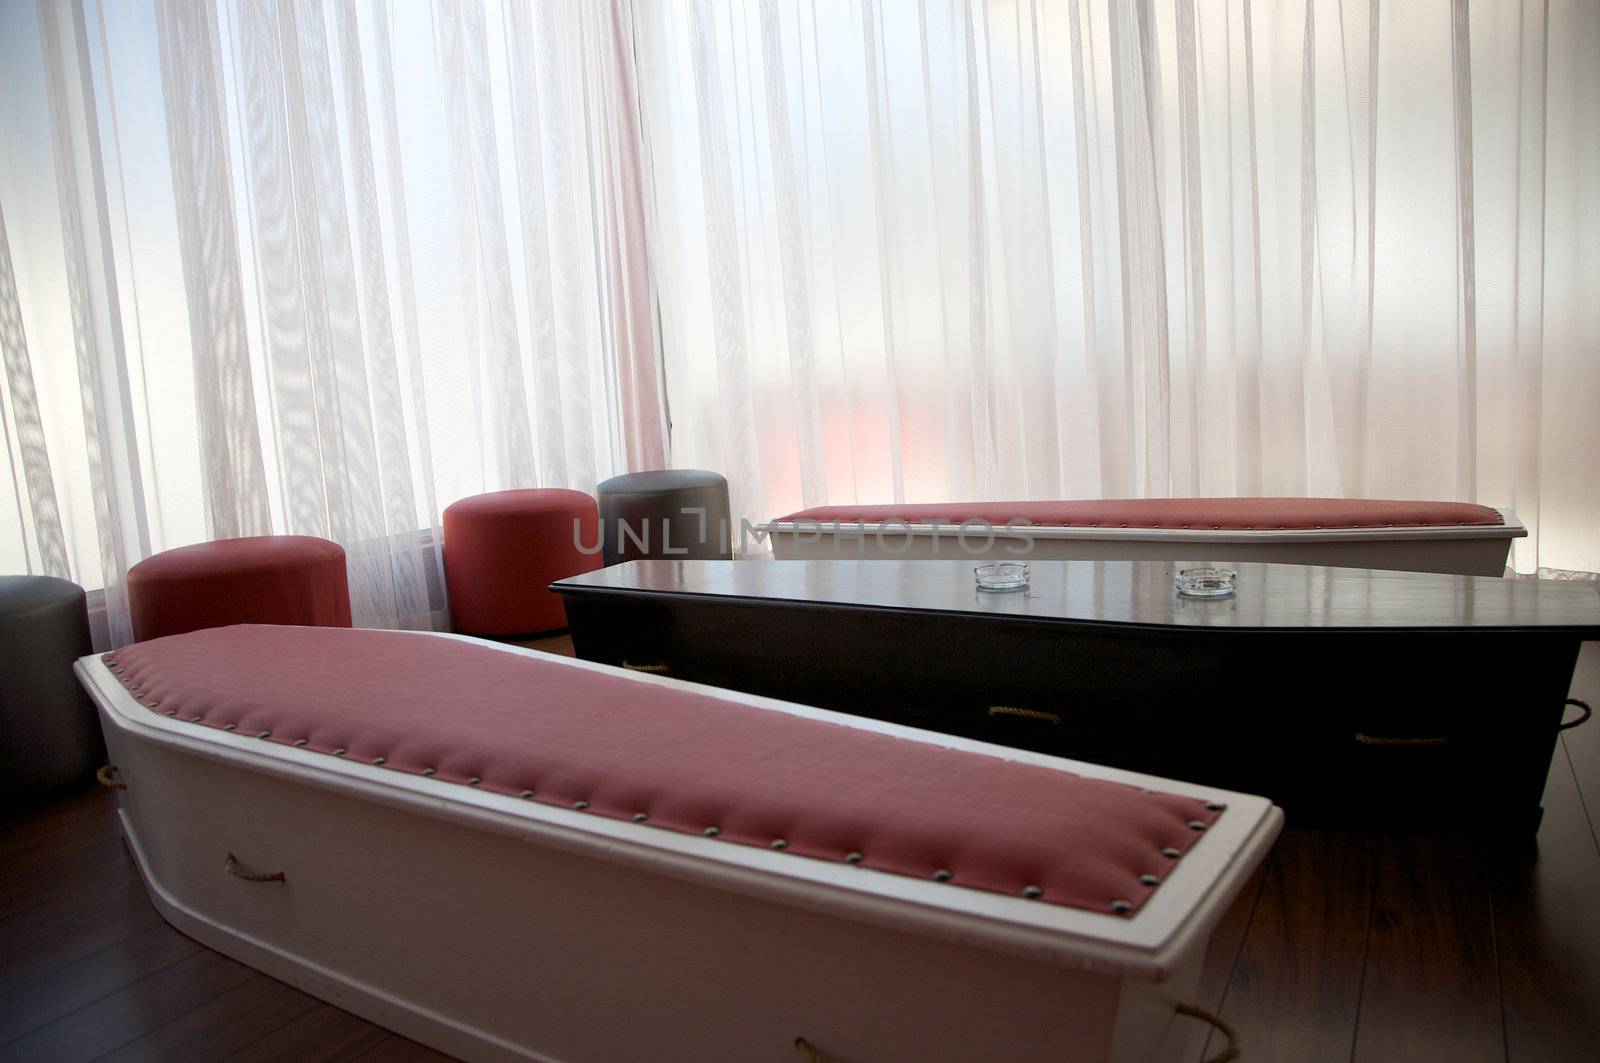 coffin in a smoking room